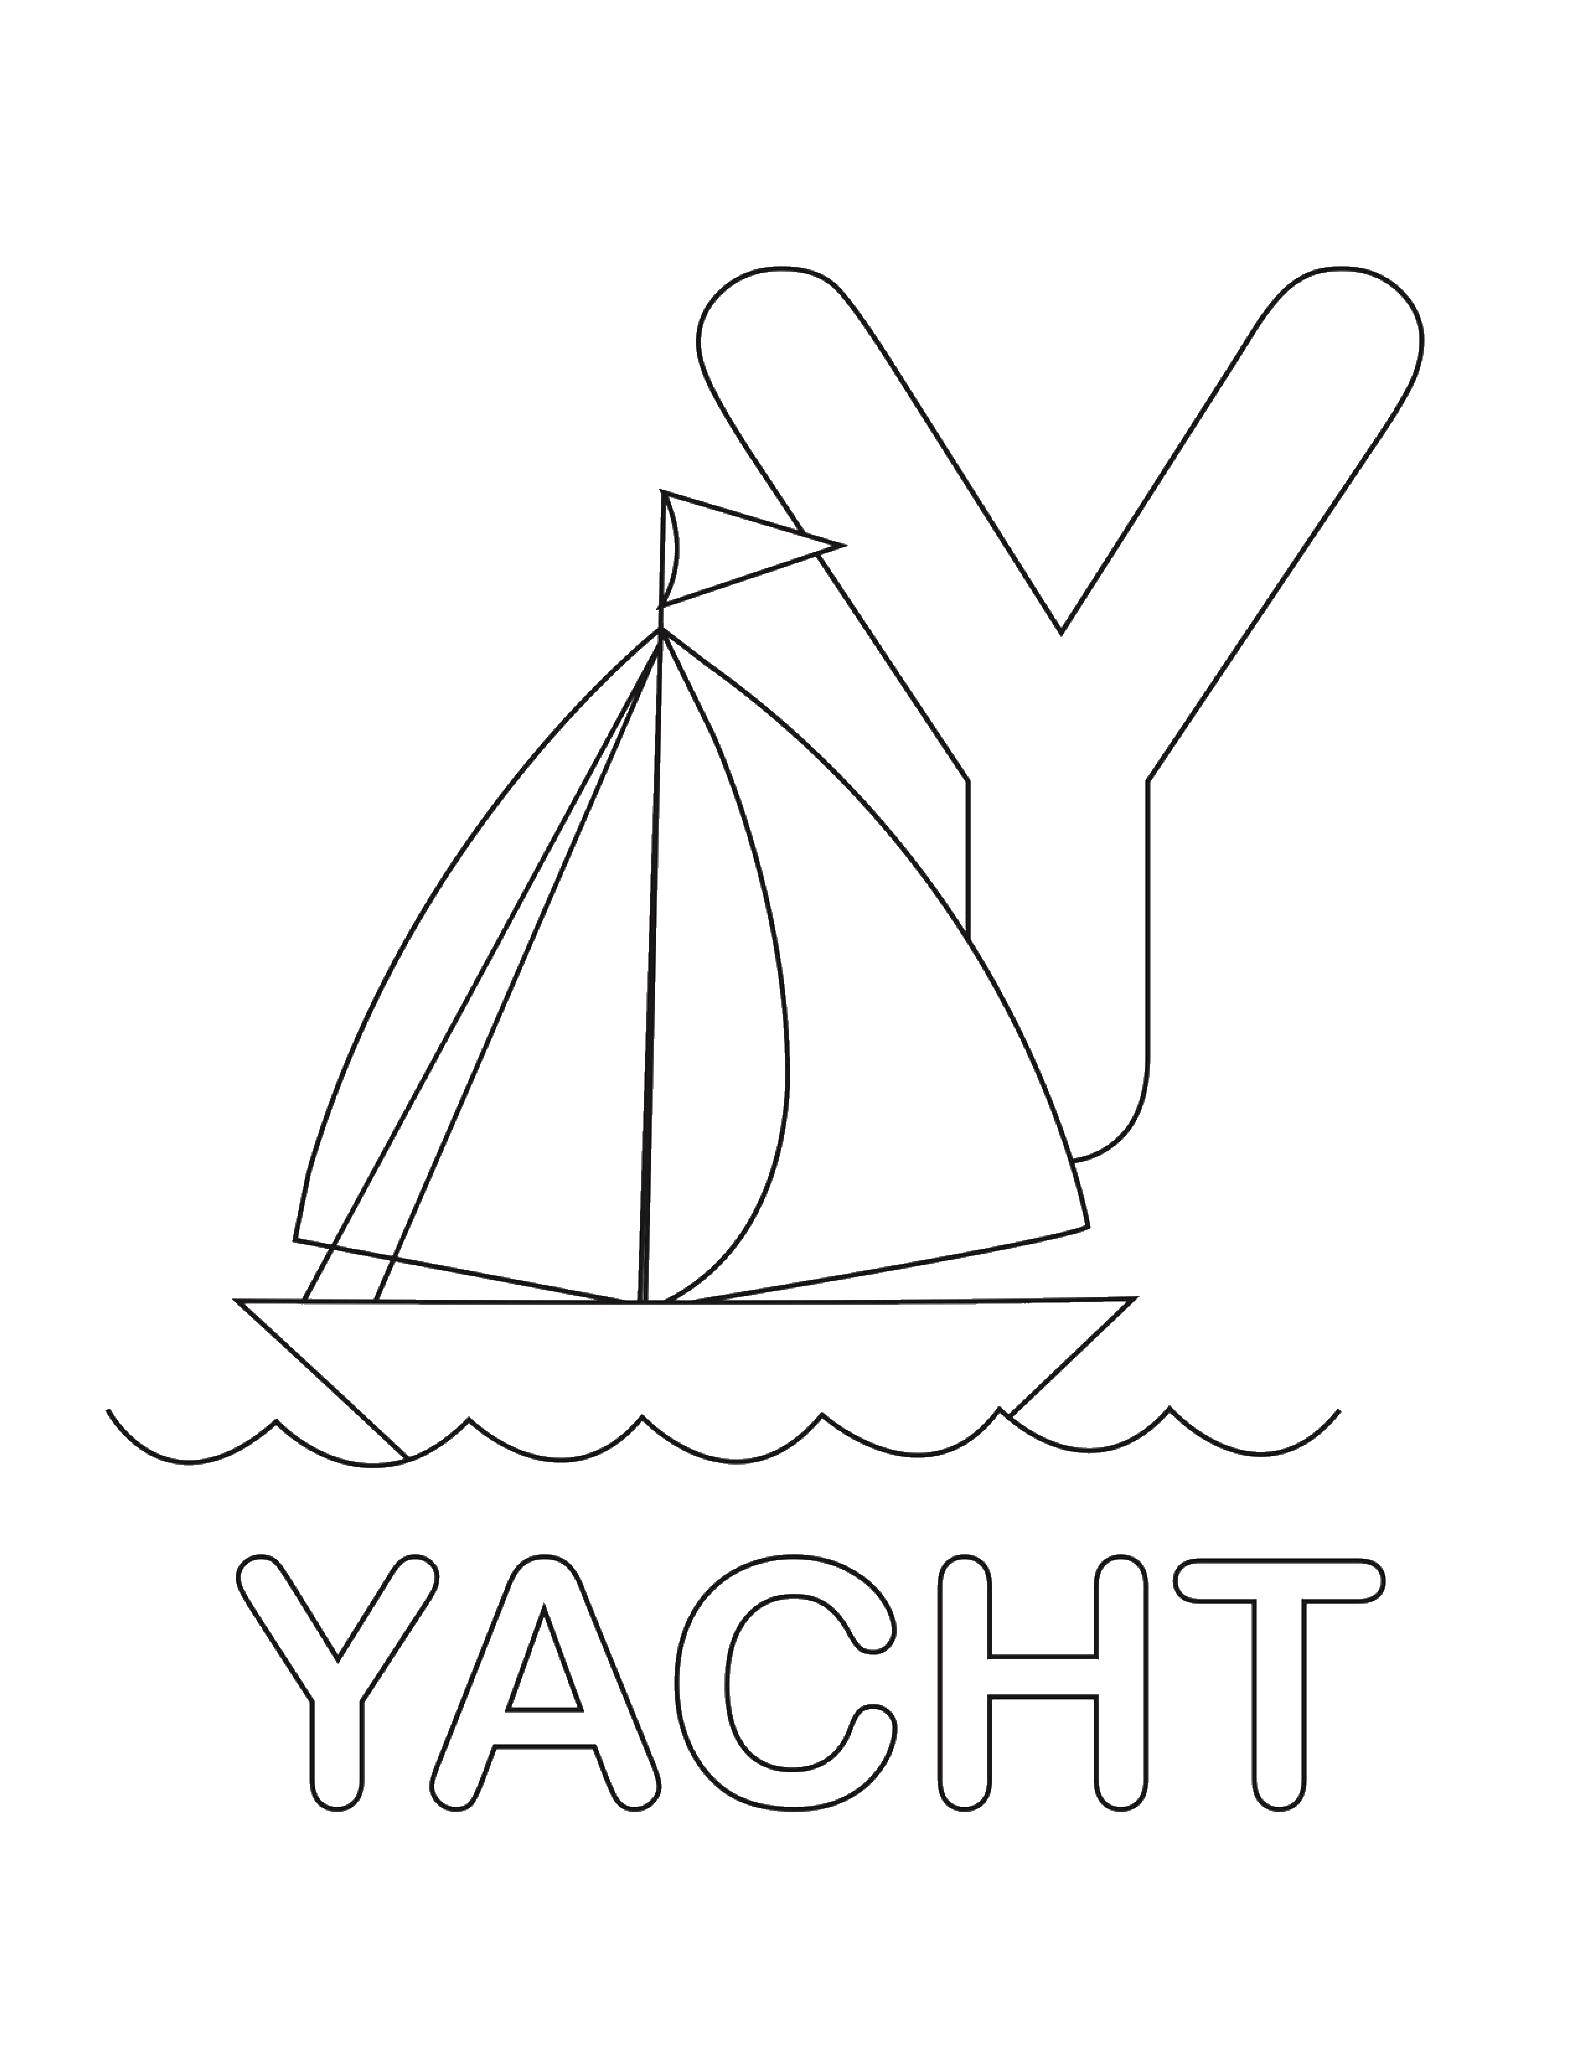 Coloring Yacht. Category English words. Tags:  the English words yacht.